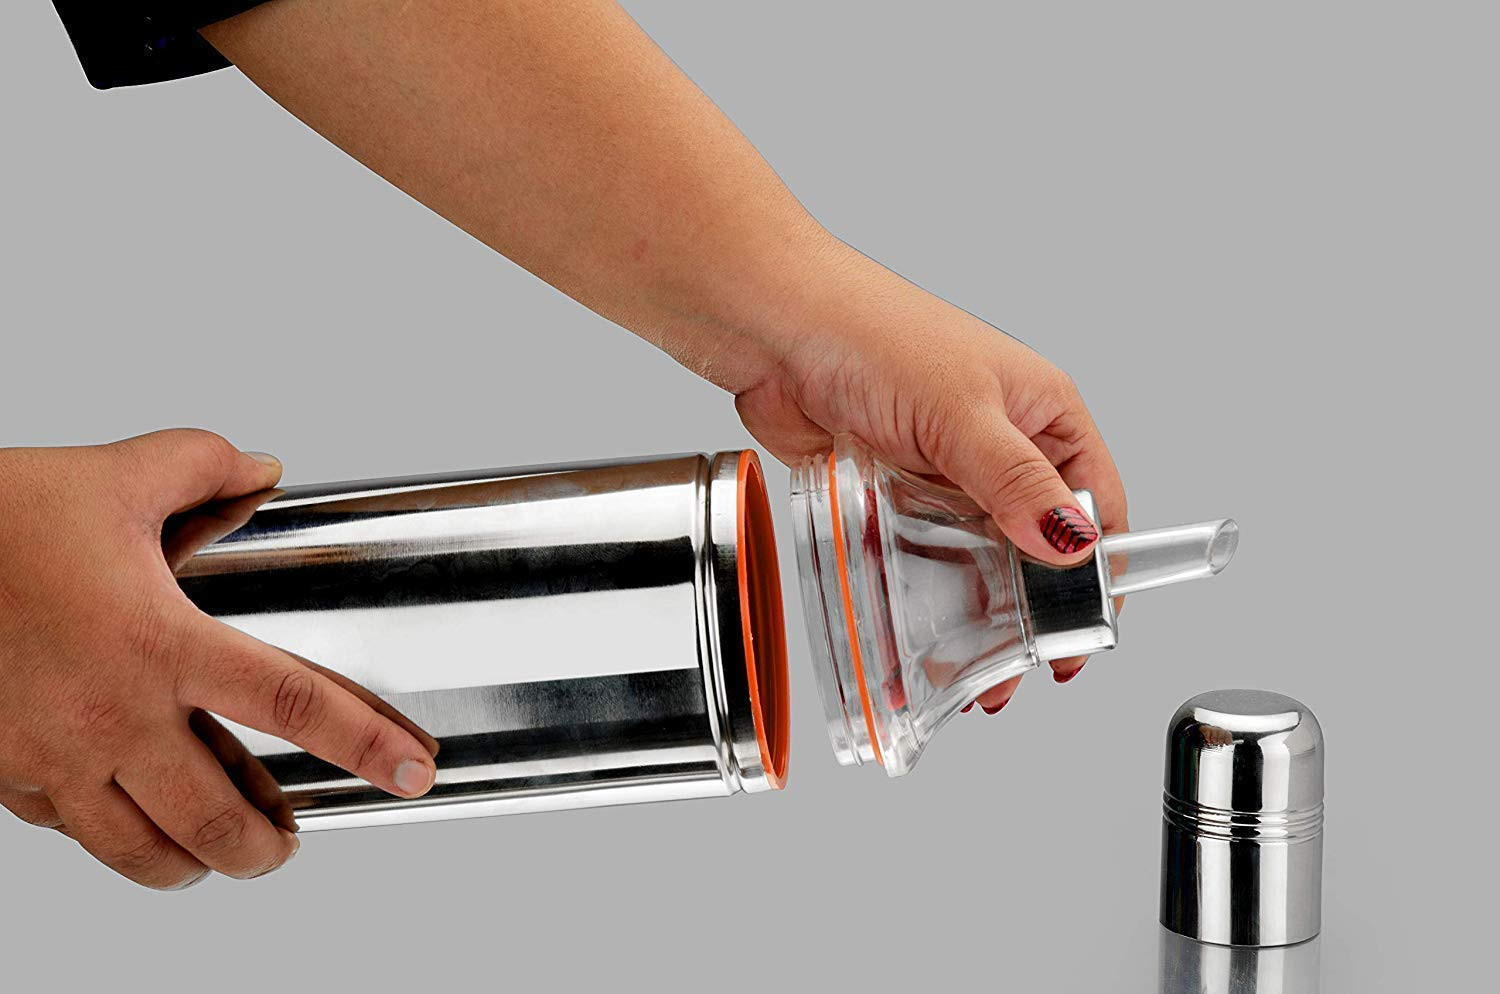 Kuber Industries Stainless Steel Oil Dispensers for Kitchen use with Sharp Finish, Slim, Look 500 Ml,Silver